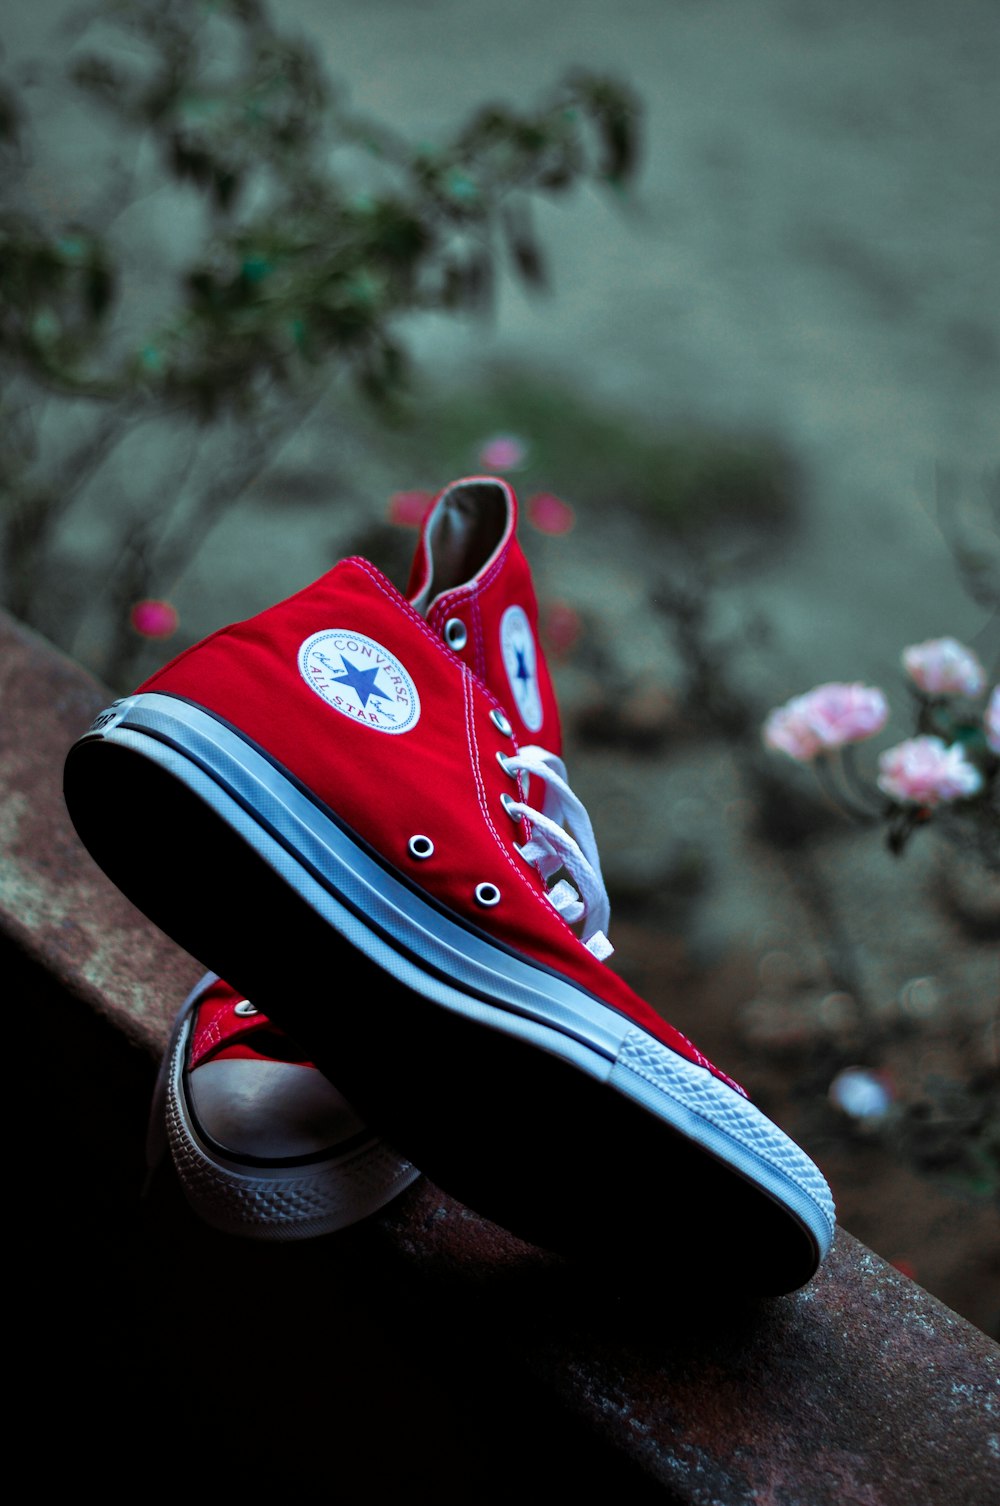 red and black converse all star high top sneakers photo – Free Converse  Image on Unsplash